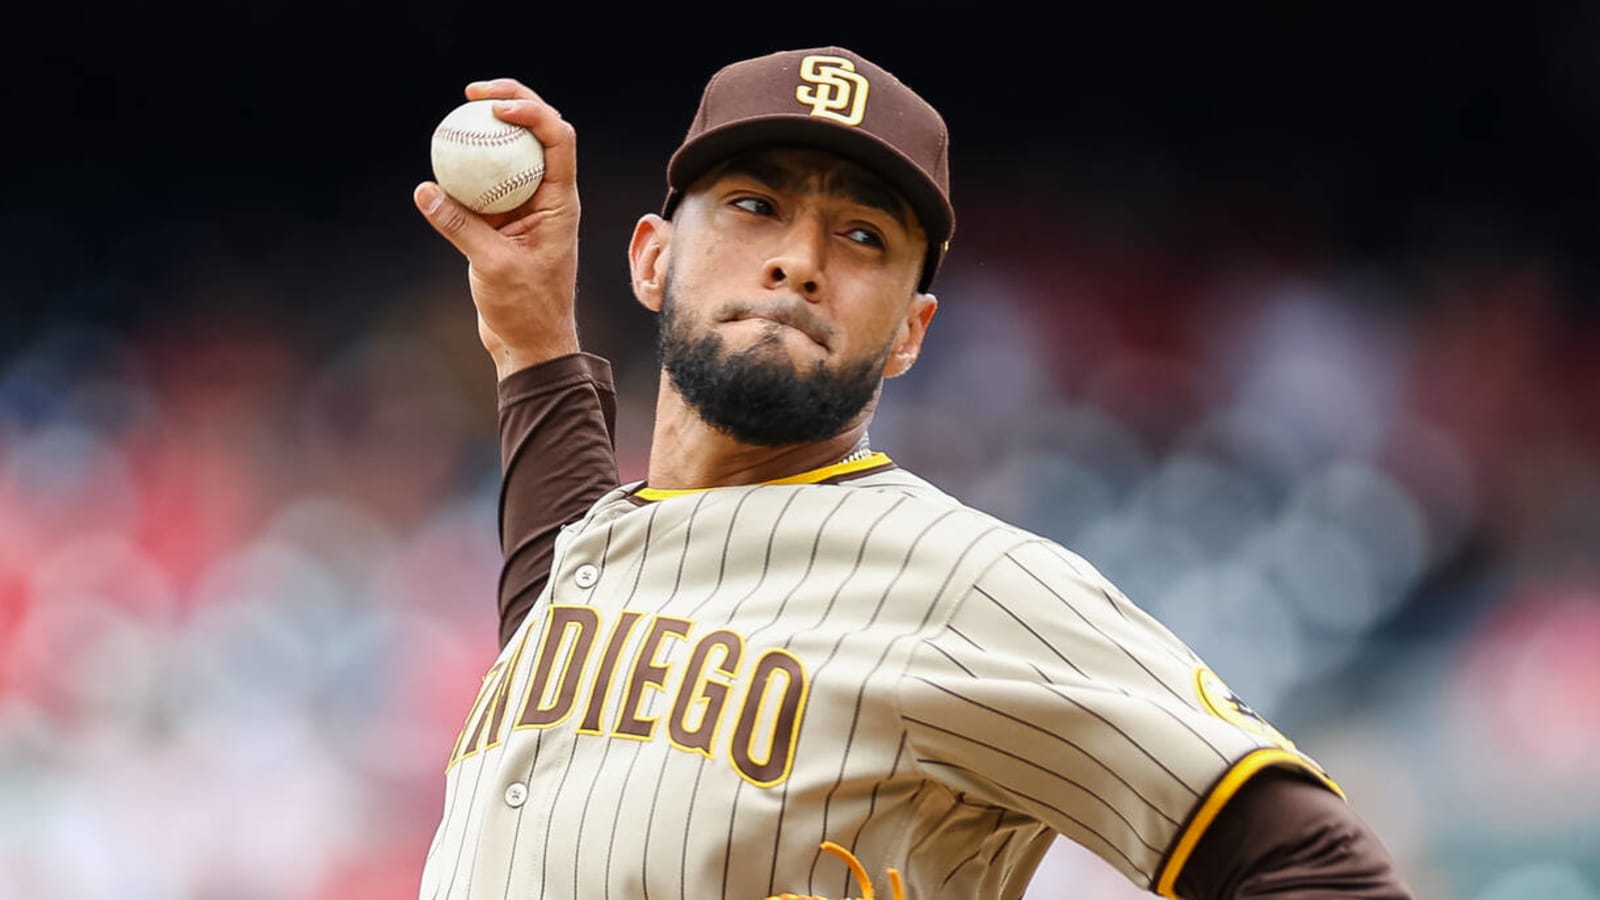 Padres sign reliever Robert Suarez to five-year, $46 million deal